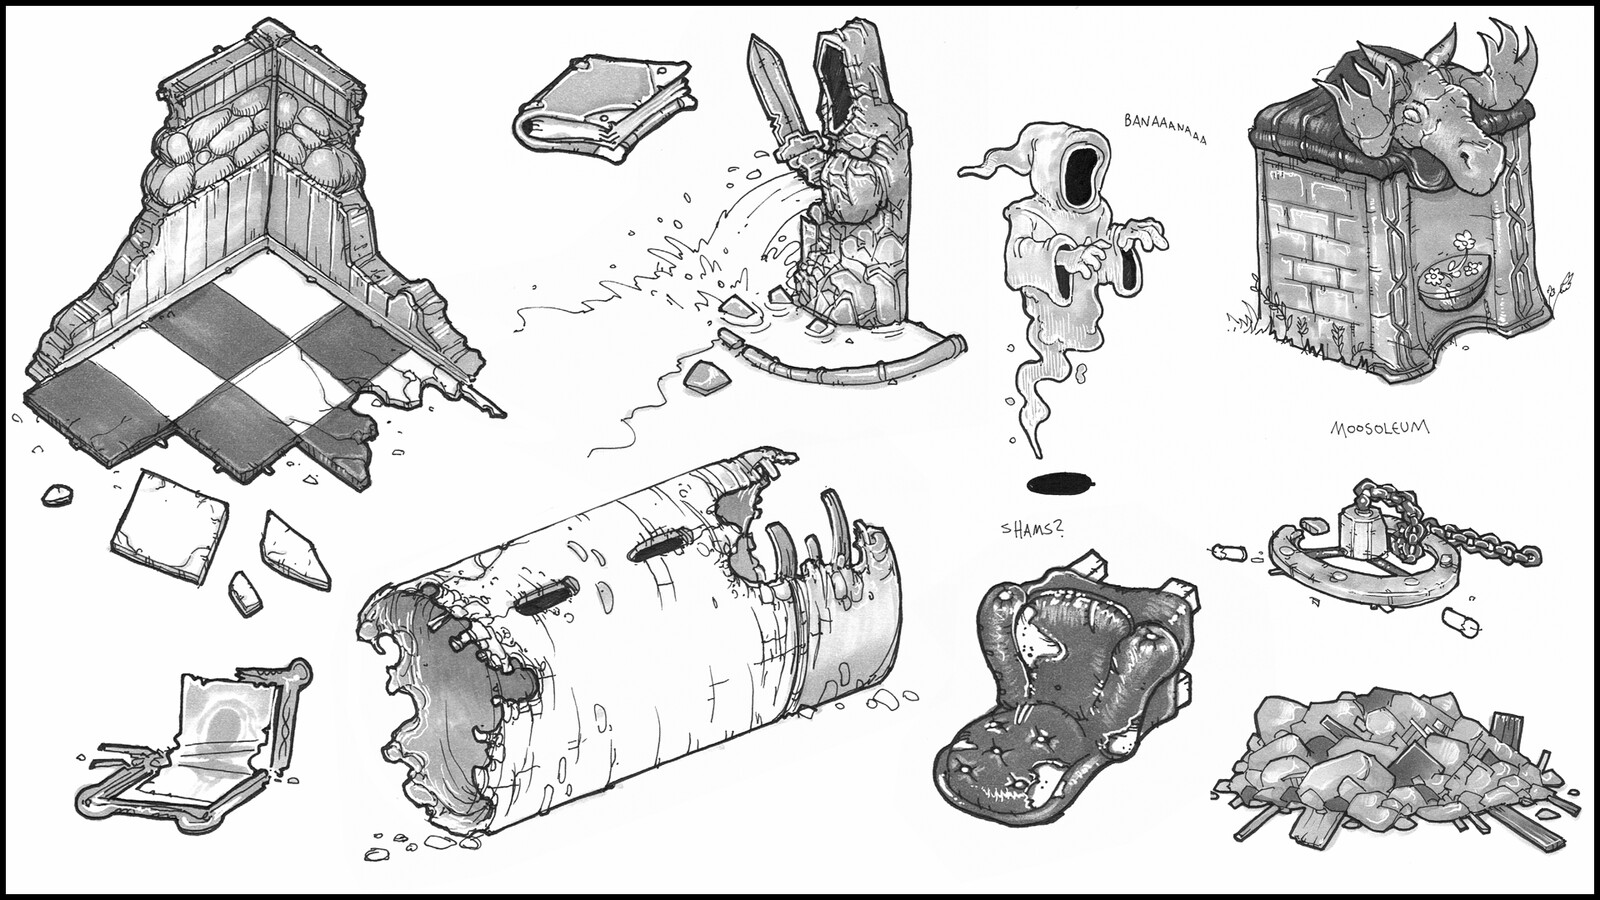 Concepts for various props